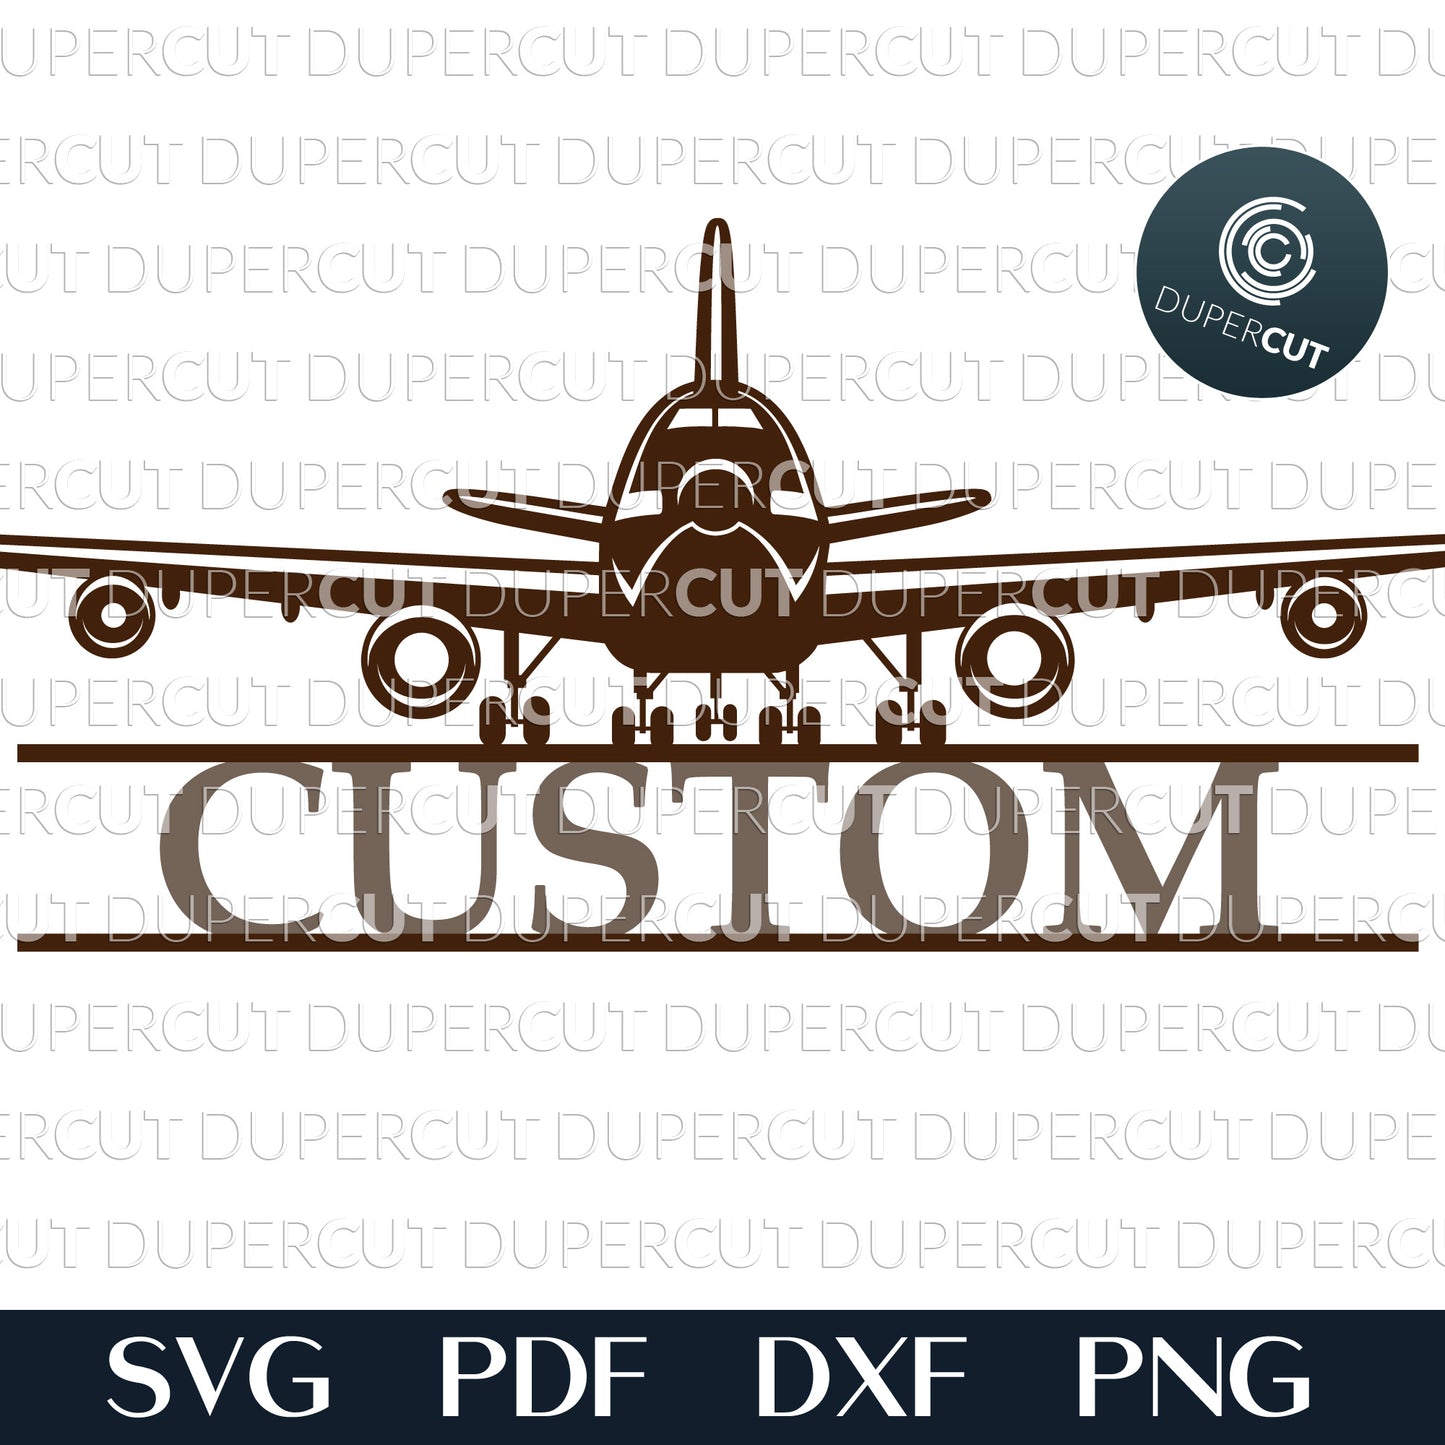 Airplane sign with custom name - SVG EPS DXF files for laser cutting with Glowforge, Cricut, Silhouette, CNC plasma machines by DuperCut